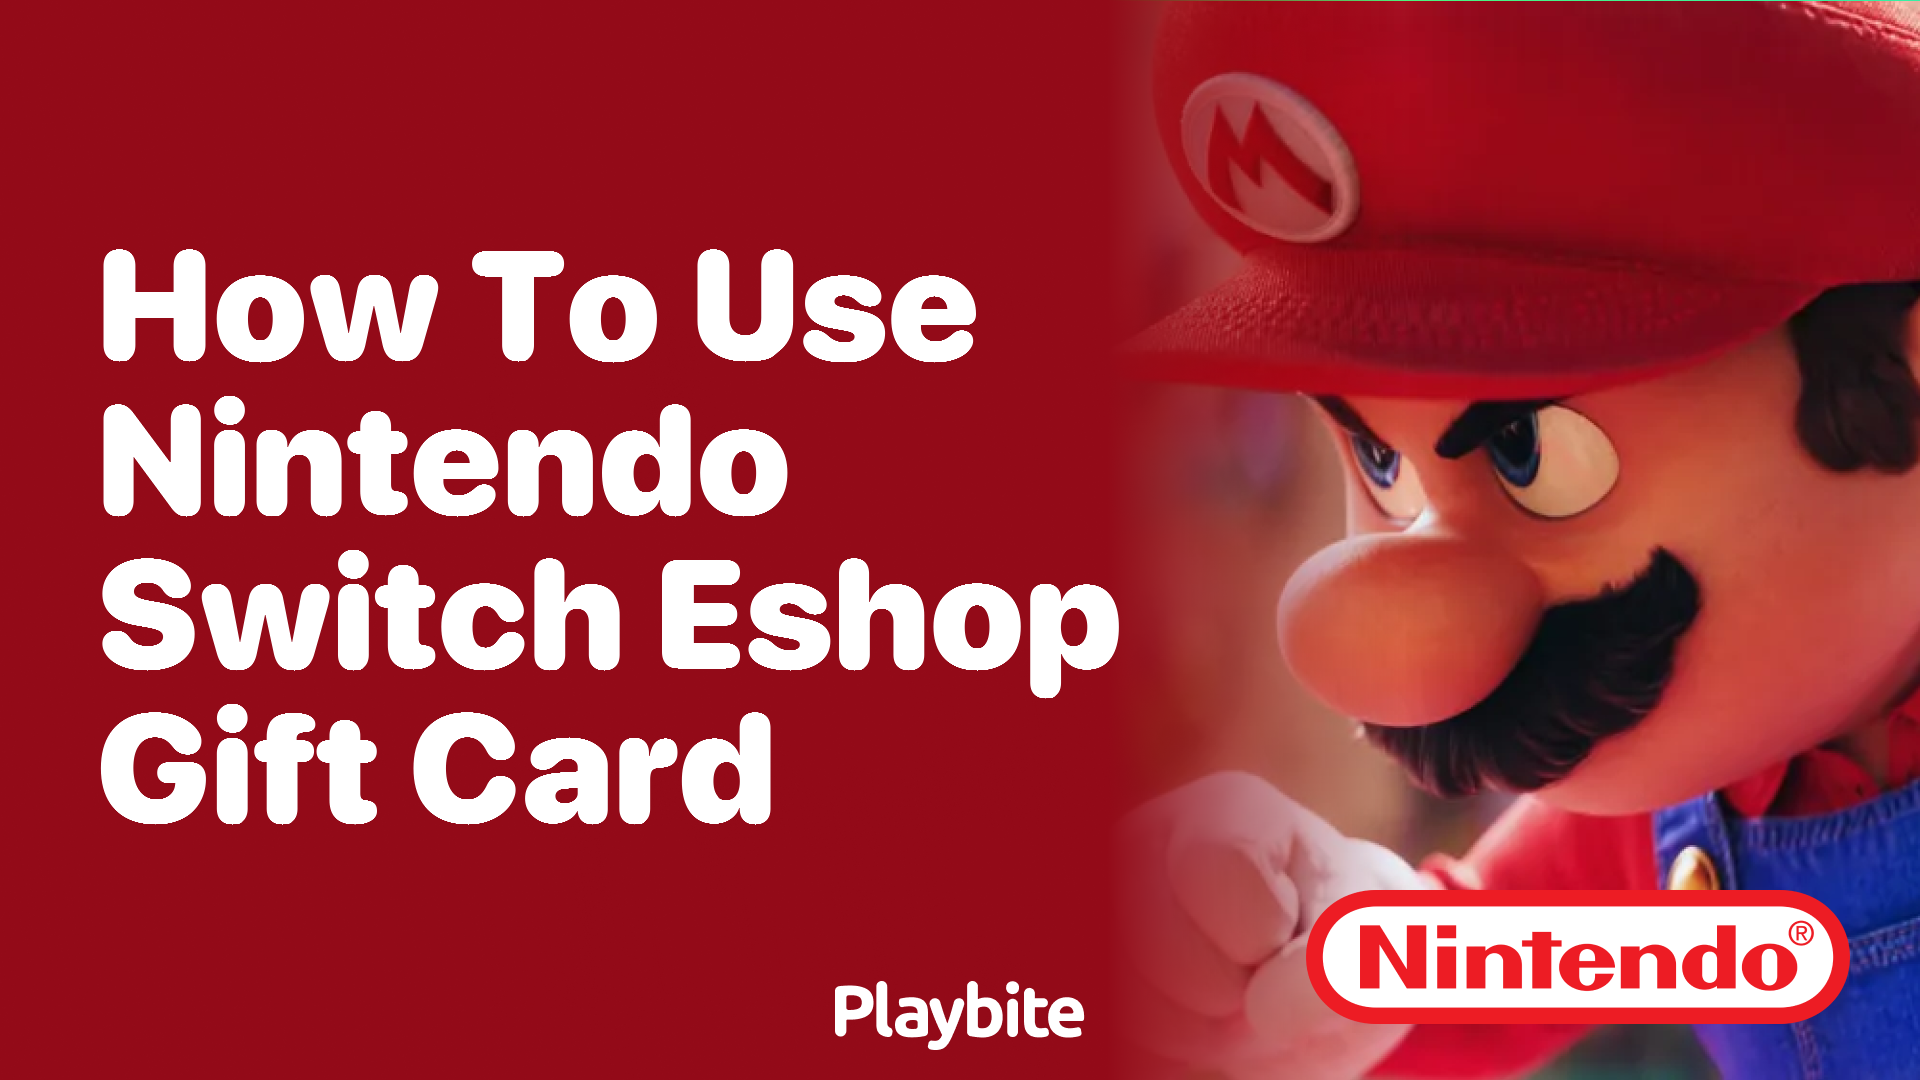 How to Use Your Nintendo Switch eShop Gift Card